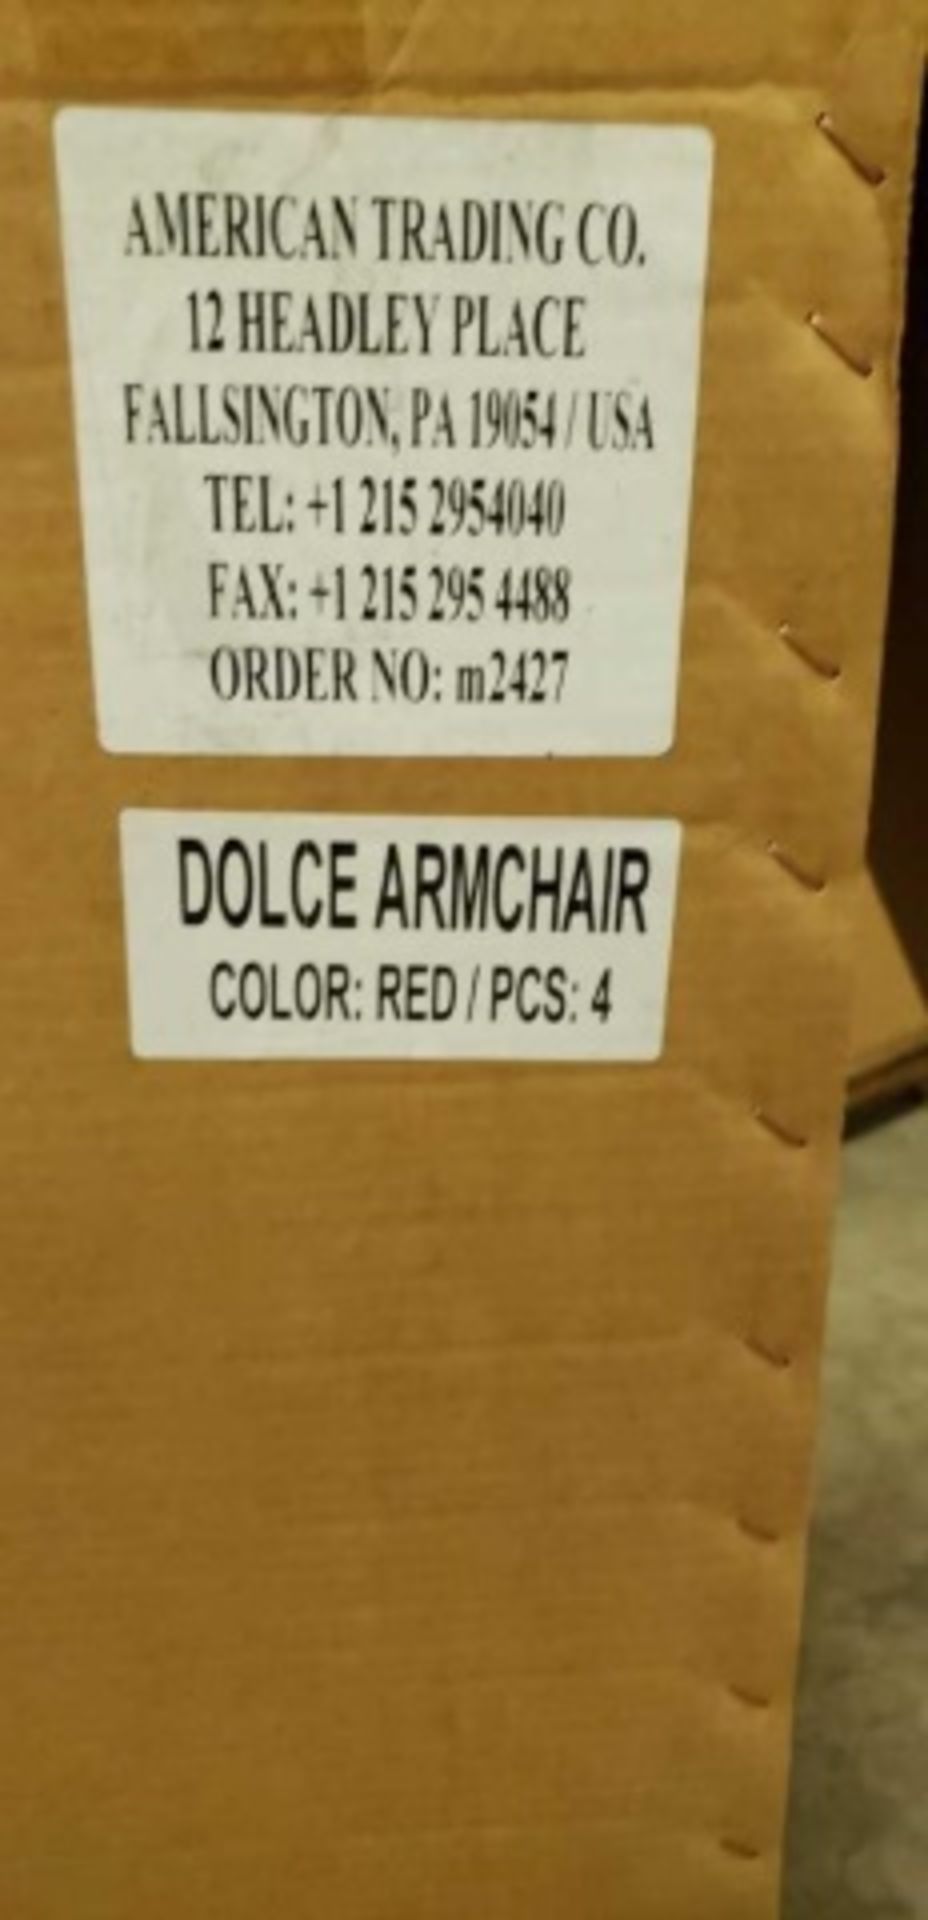 Domenica Arm Chair, red, one box w/ 3, 3 total - Image 4 of 4